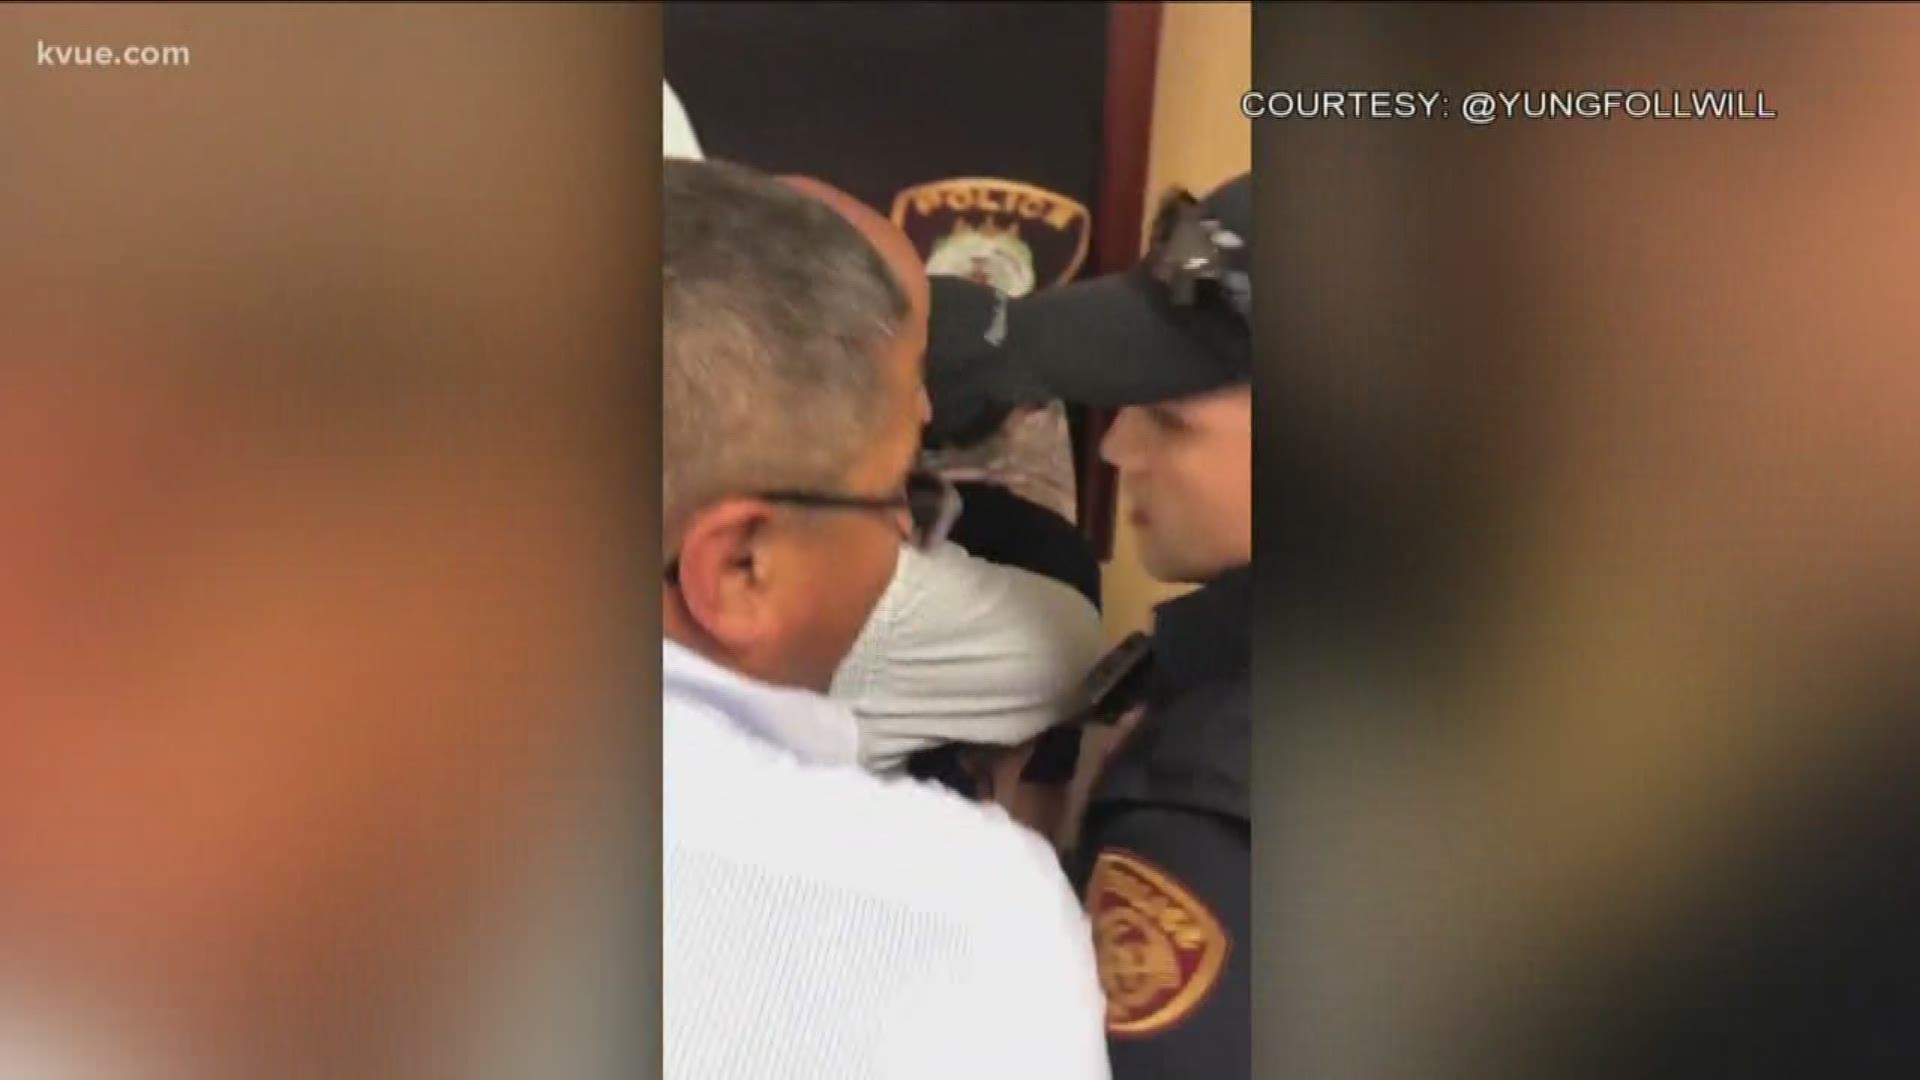 New video has emerged of an arrest on Wednesday at Texas State.